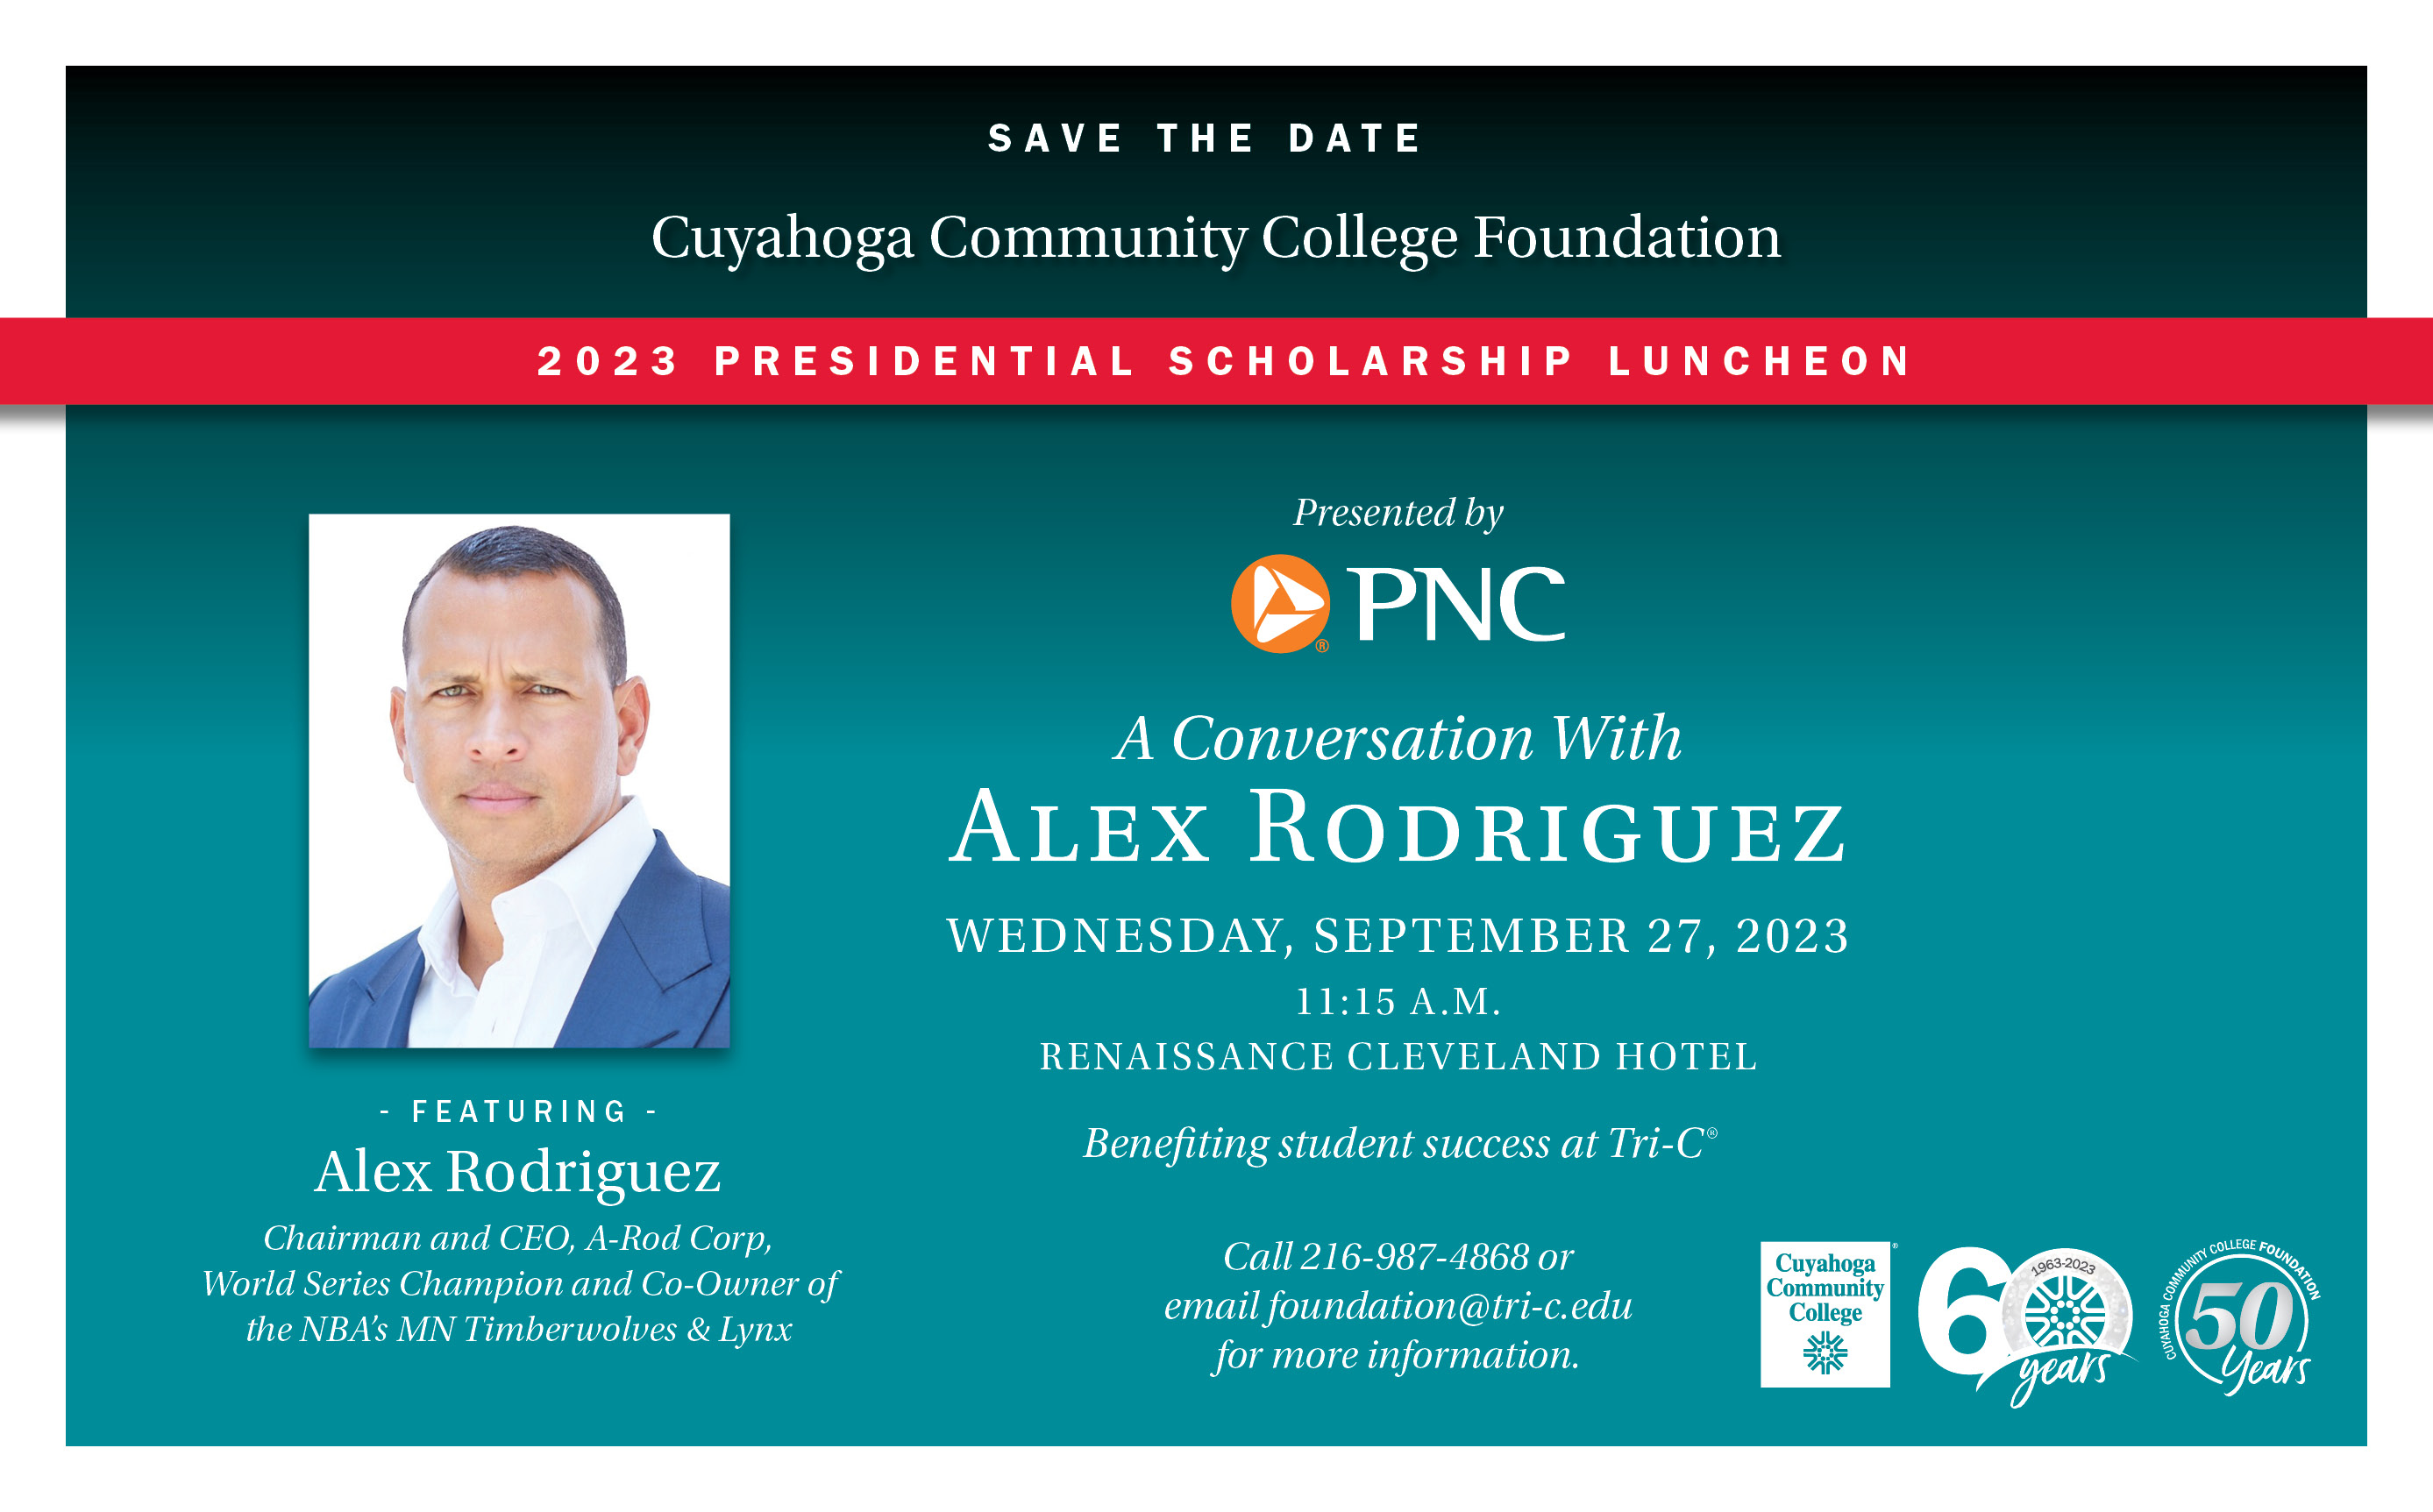 Save the Date: Cuyahoga Community College Foundation 2023 Presidential Scholarship Luncheon, presented by PNC. A conversation with Alex Rodriguez, Chairman & CEO, A-Rod Corp, World Series Champion and co-owner of the NBA's Minnesota Timberwolves & Lynx. Wednesday, September 27,2023, 11:15 am to 1:05 pm, Renaissance Cleveland Hotel. Call 216-987-4868 or email foundation@tri-c.edu for more information